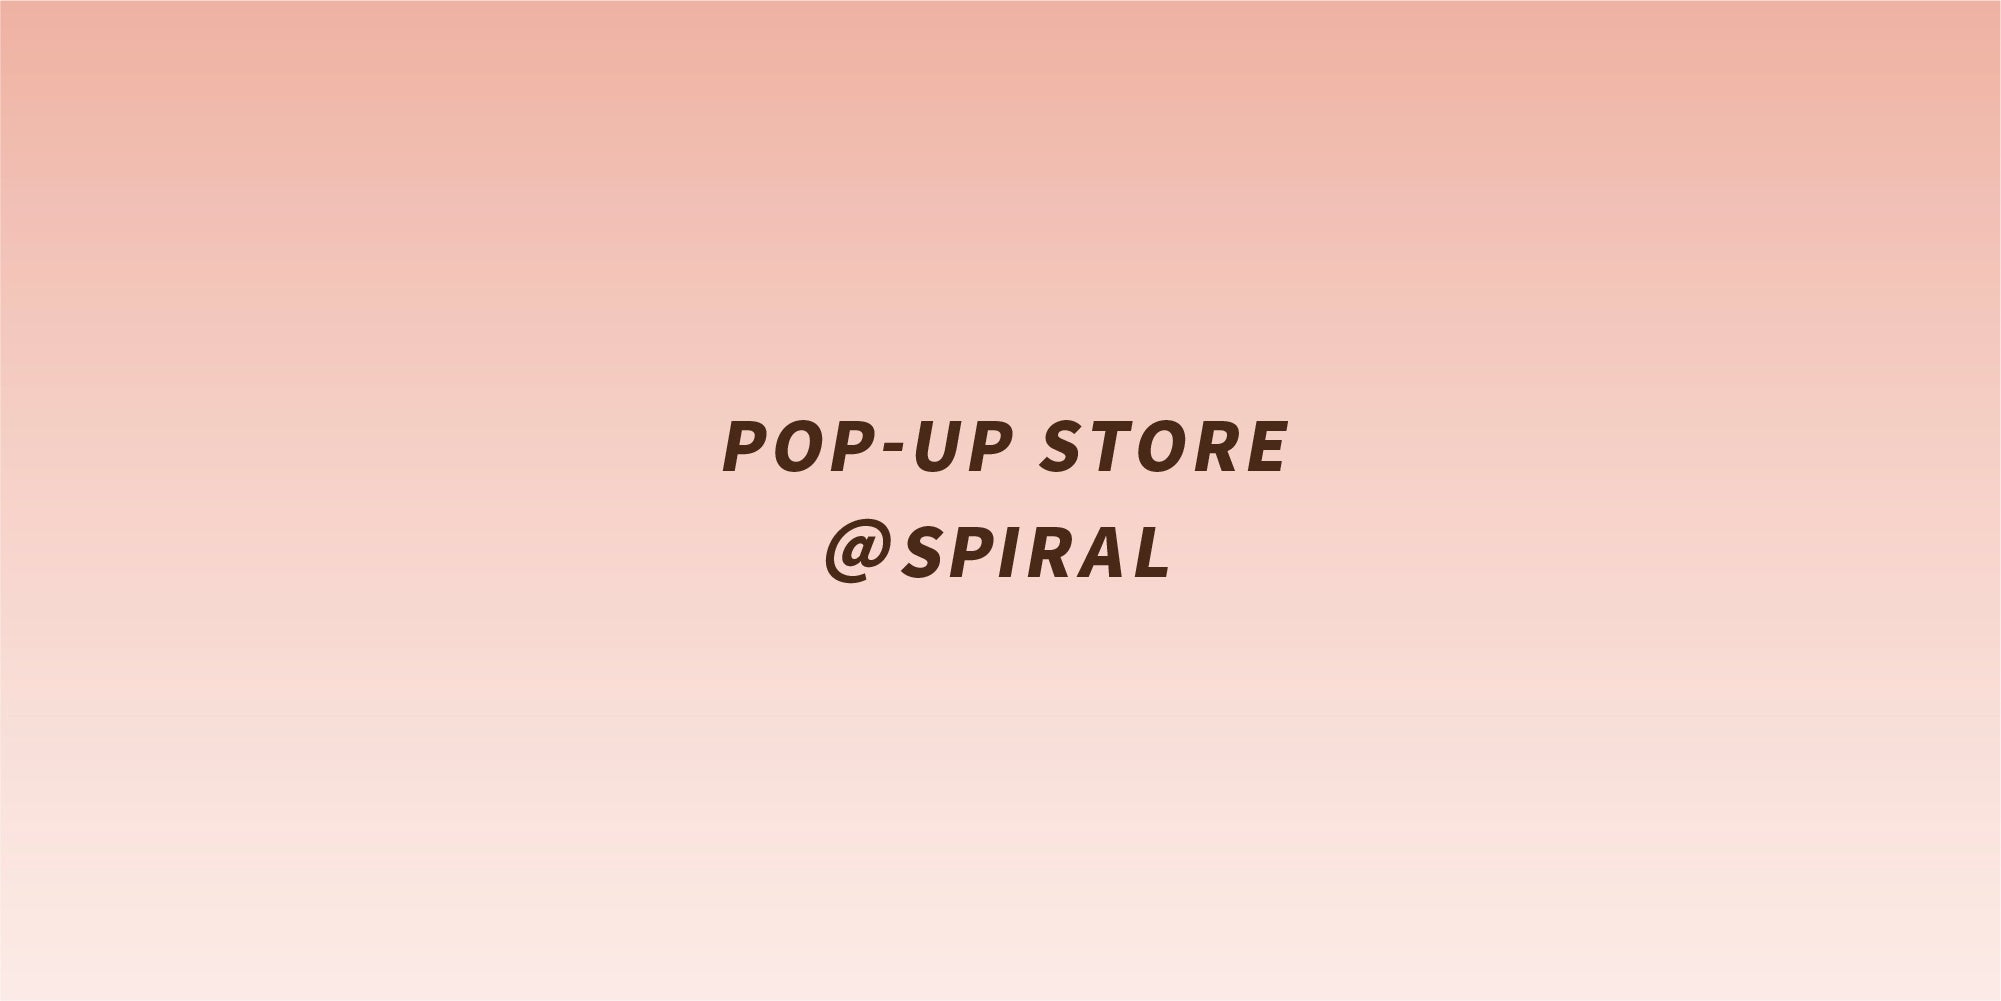 SPIRALにてPOP-UP STOREを開催。